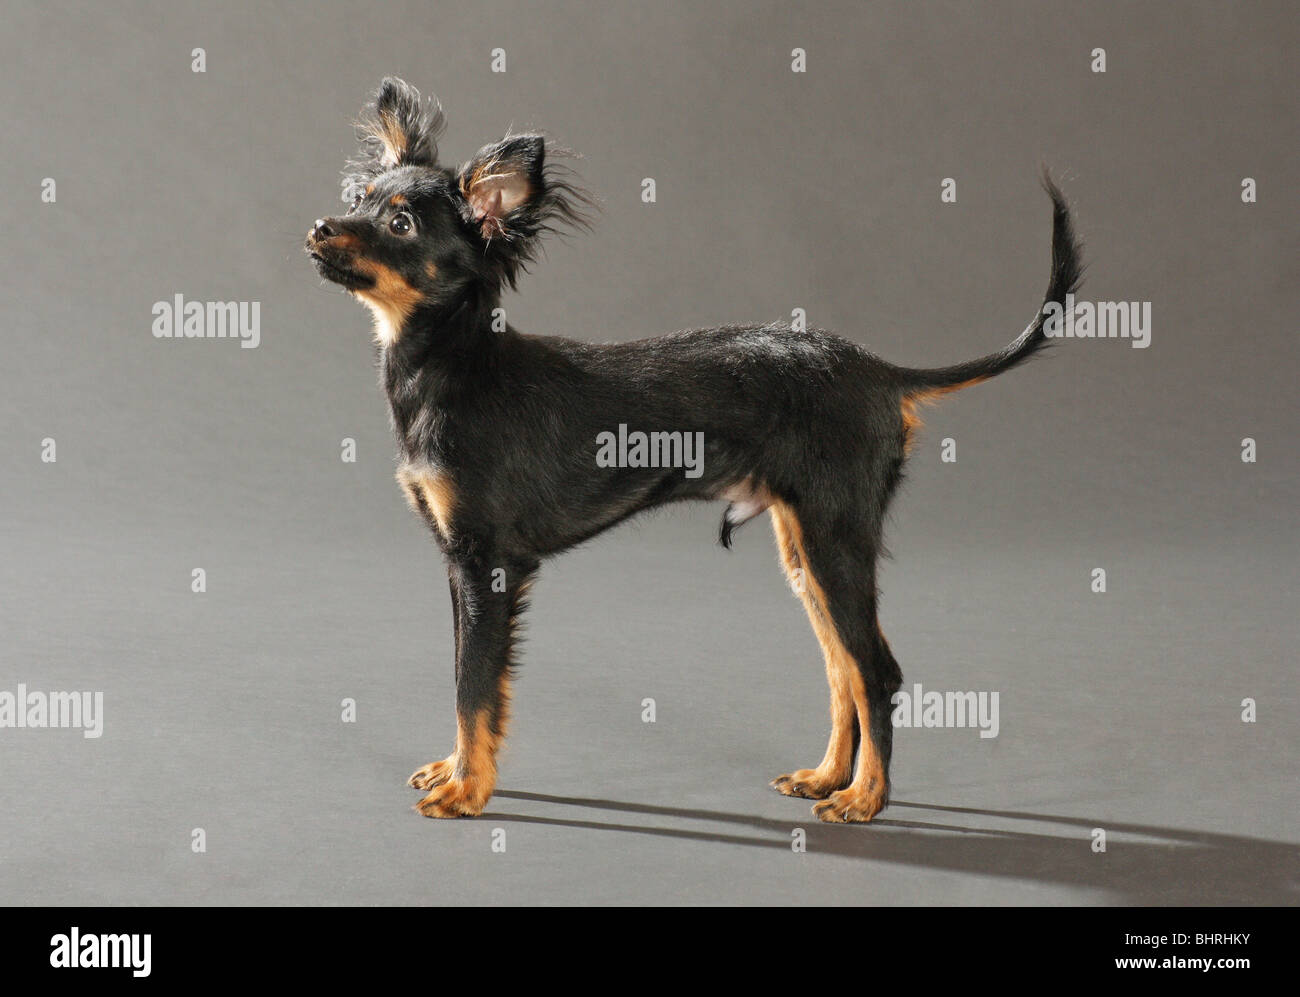 Russian Toy Terrier dog - standing - cut out Stock Photo